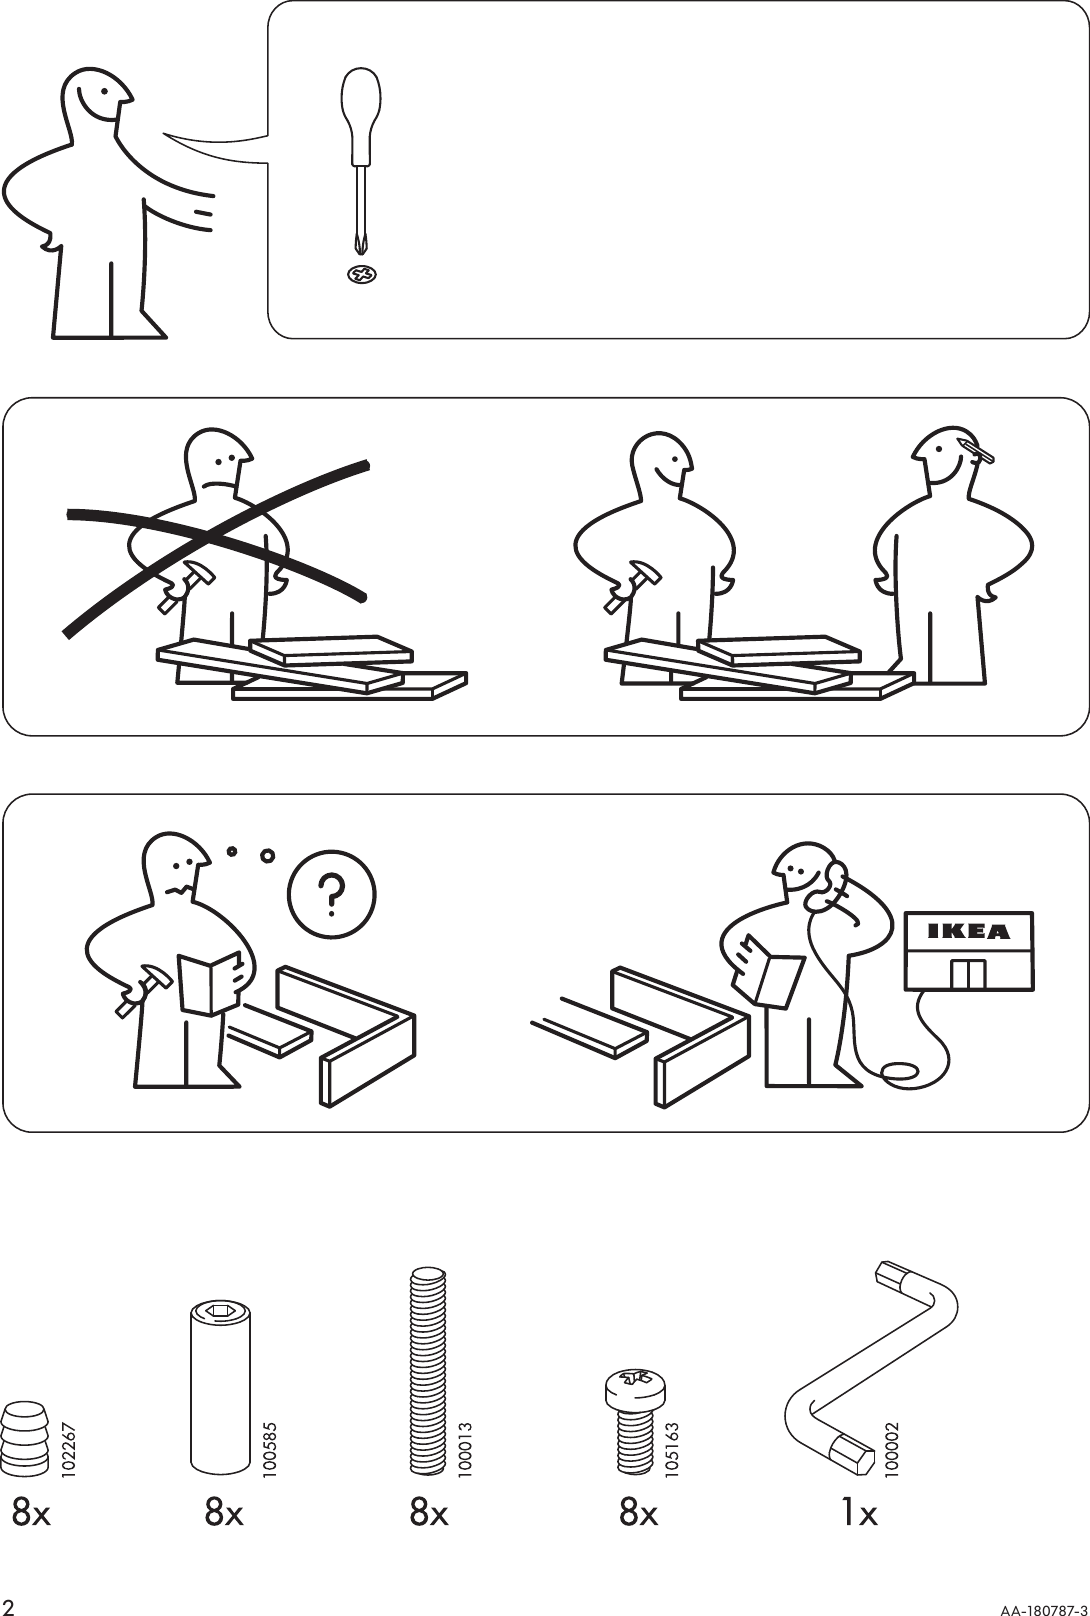 Page 2 of 4 - Ikea Ikea-Heimdal-Head-Footboard-Queen-Assembly-Instruction